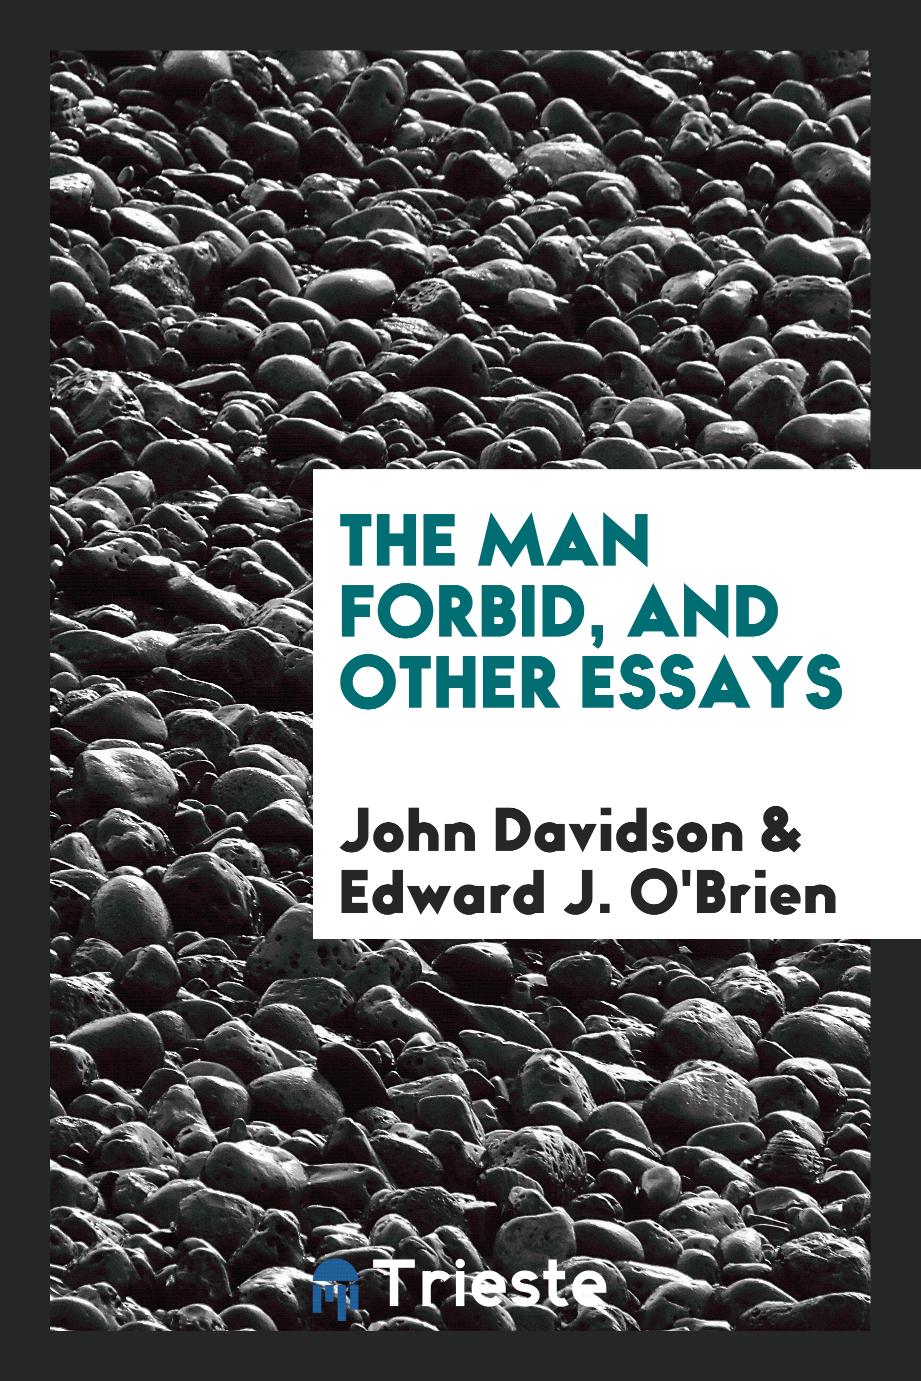 The man forbid, and other essays